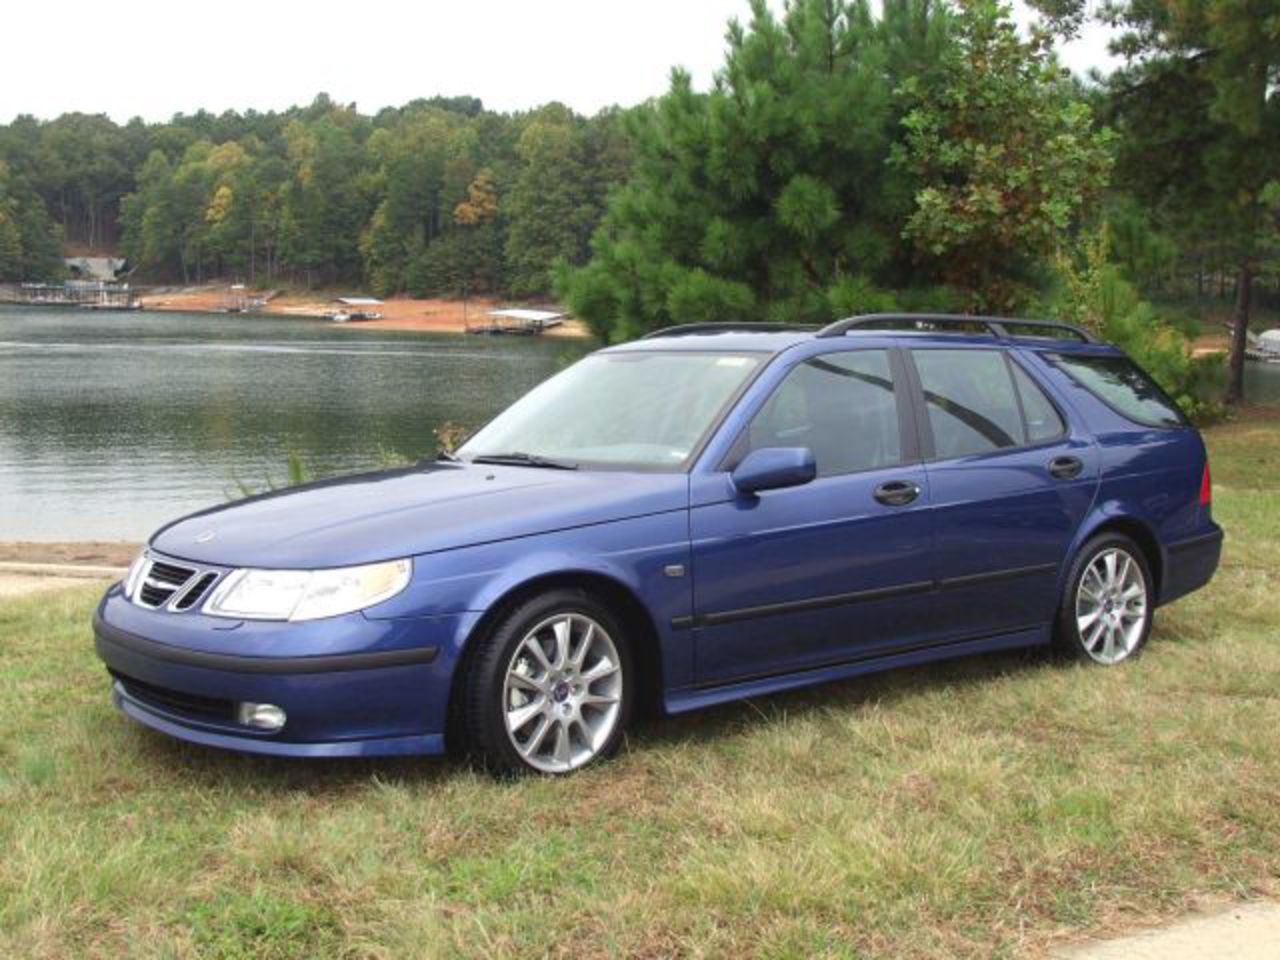 2002 Saab 9-5 Reviews and Ratings - The Car Connection